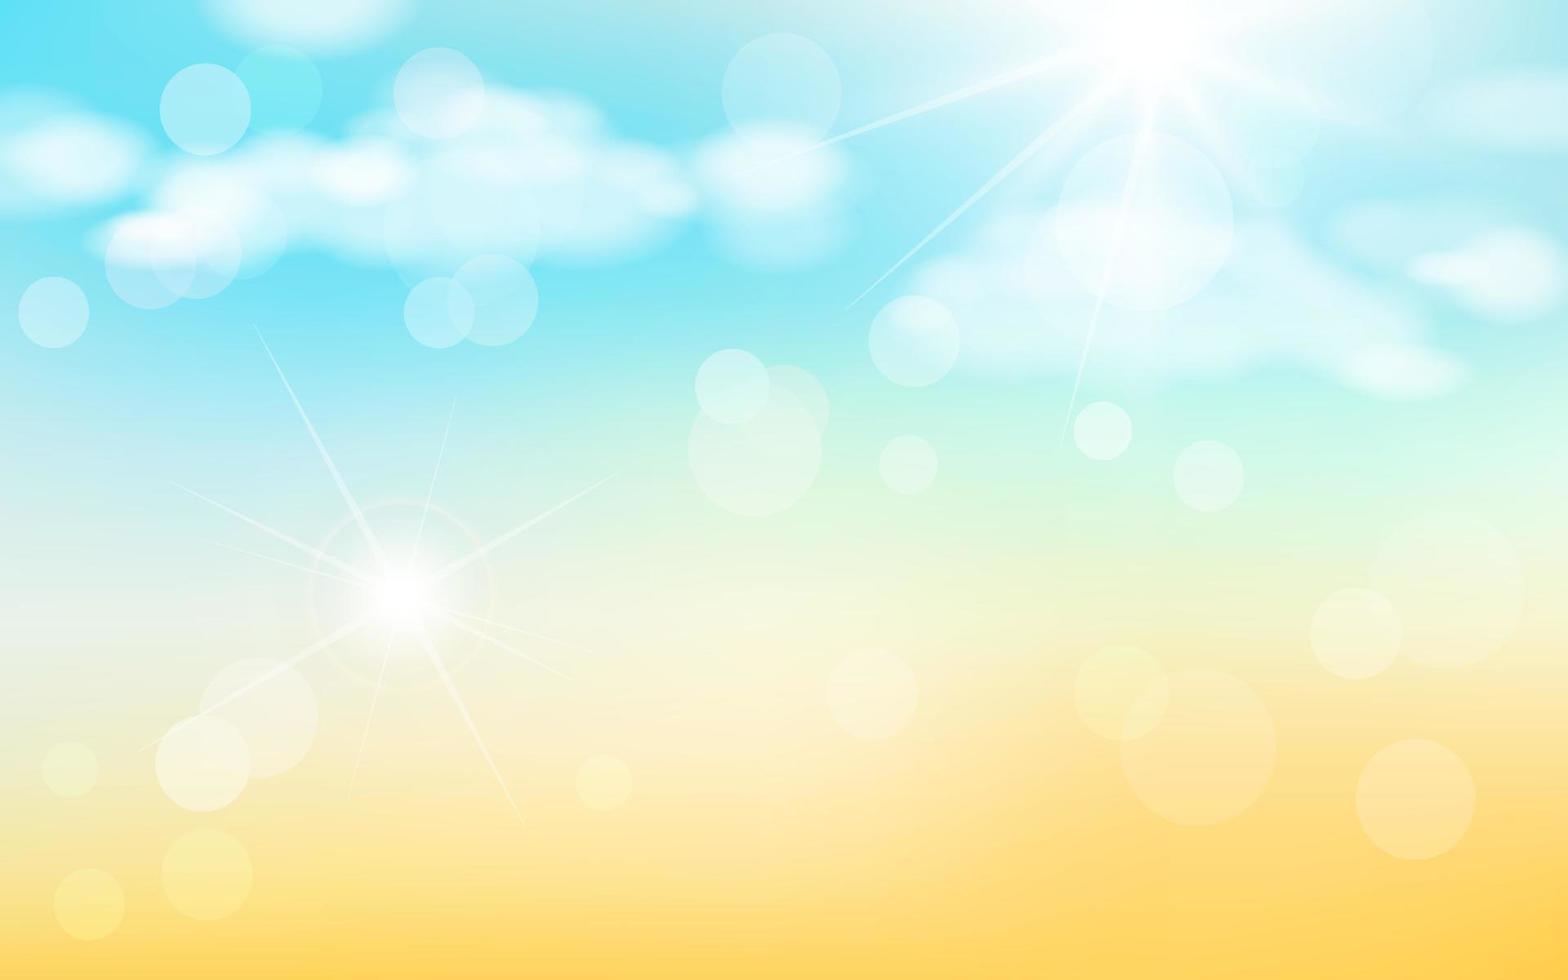 Abstract summer background with sunbeams and bokeh effect. Illustration of sand clouds and sky with bright sun. vector